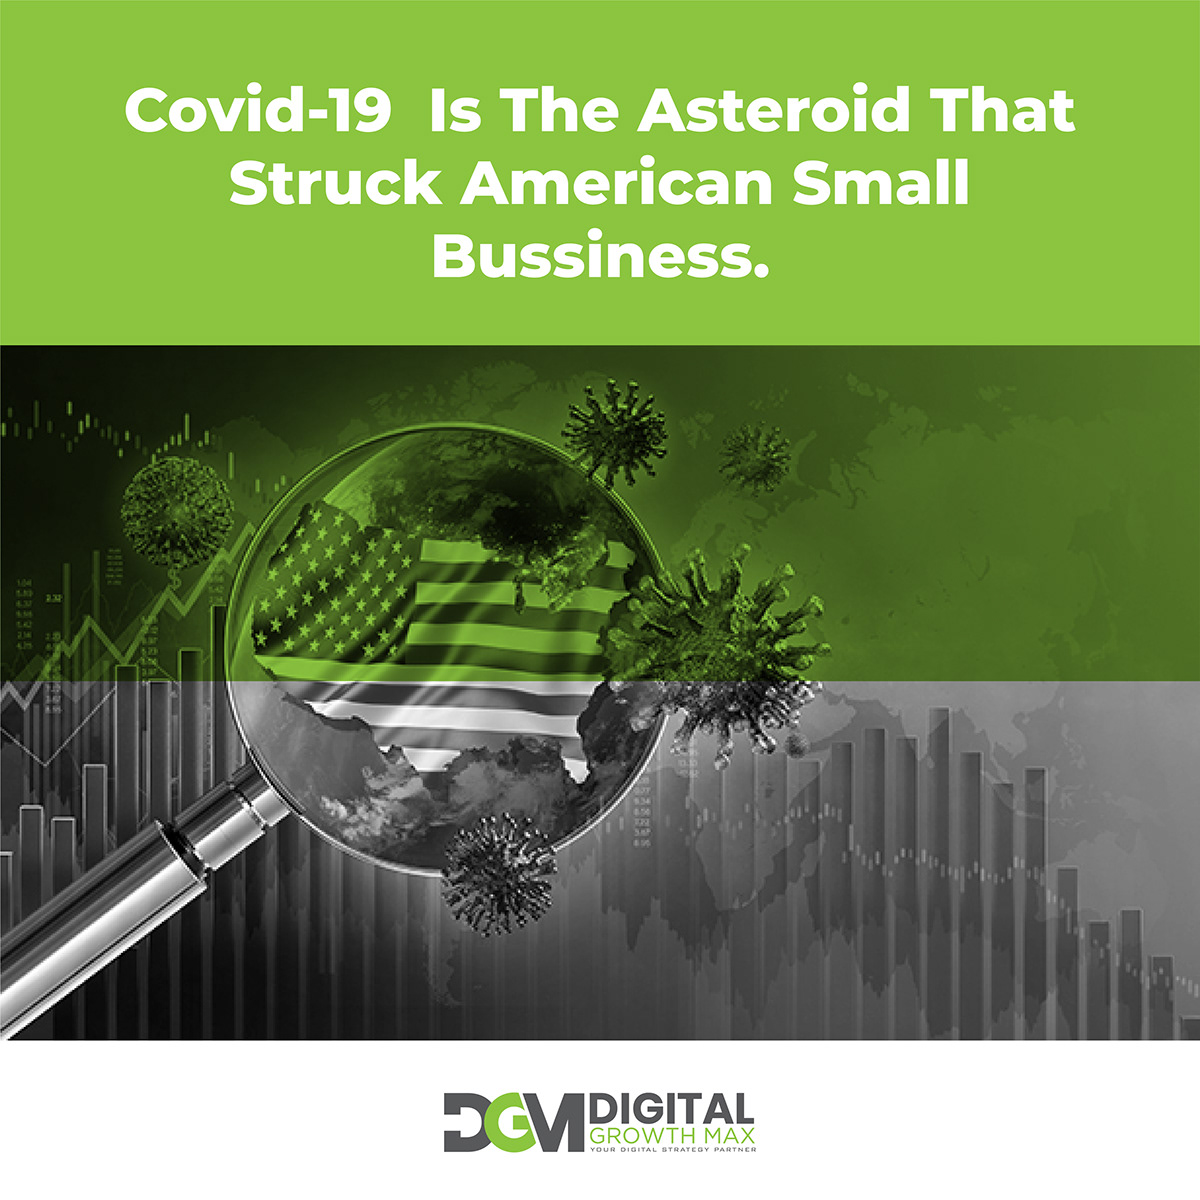 business tips  COVid COVID-19 marketing tips